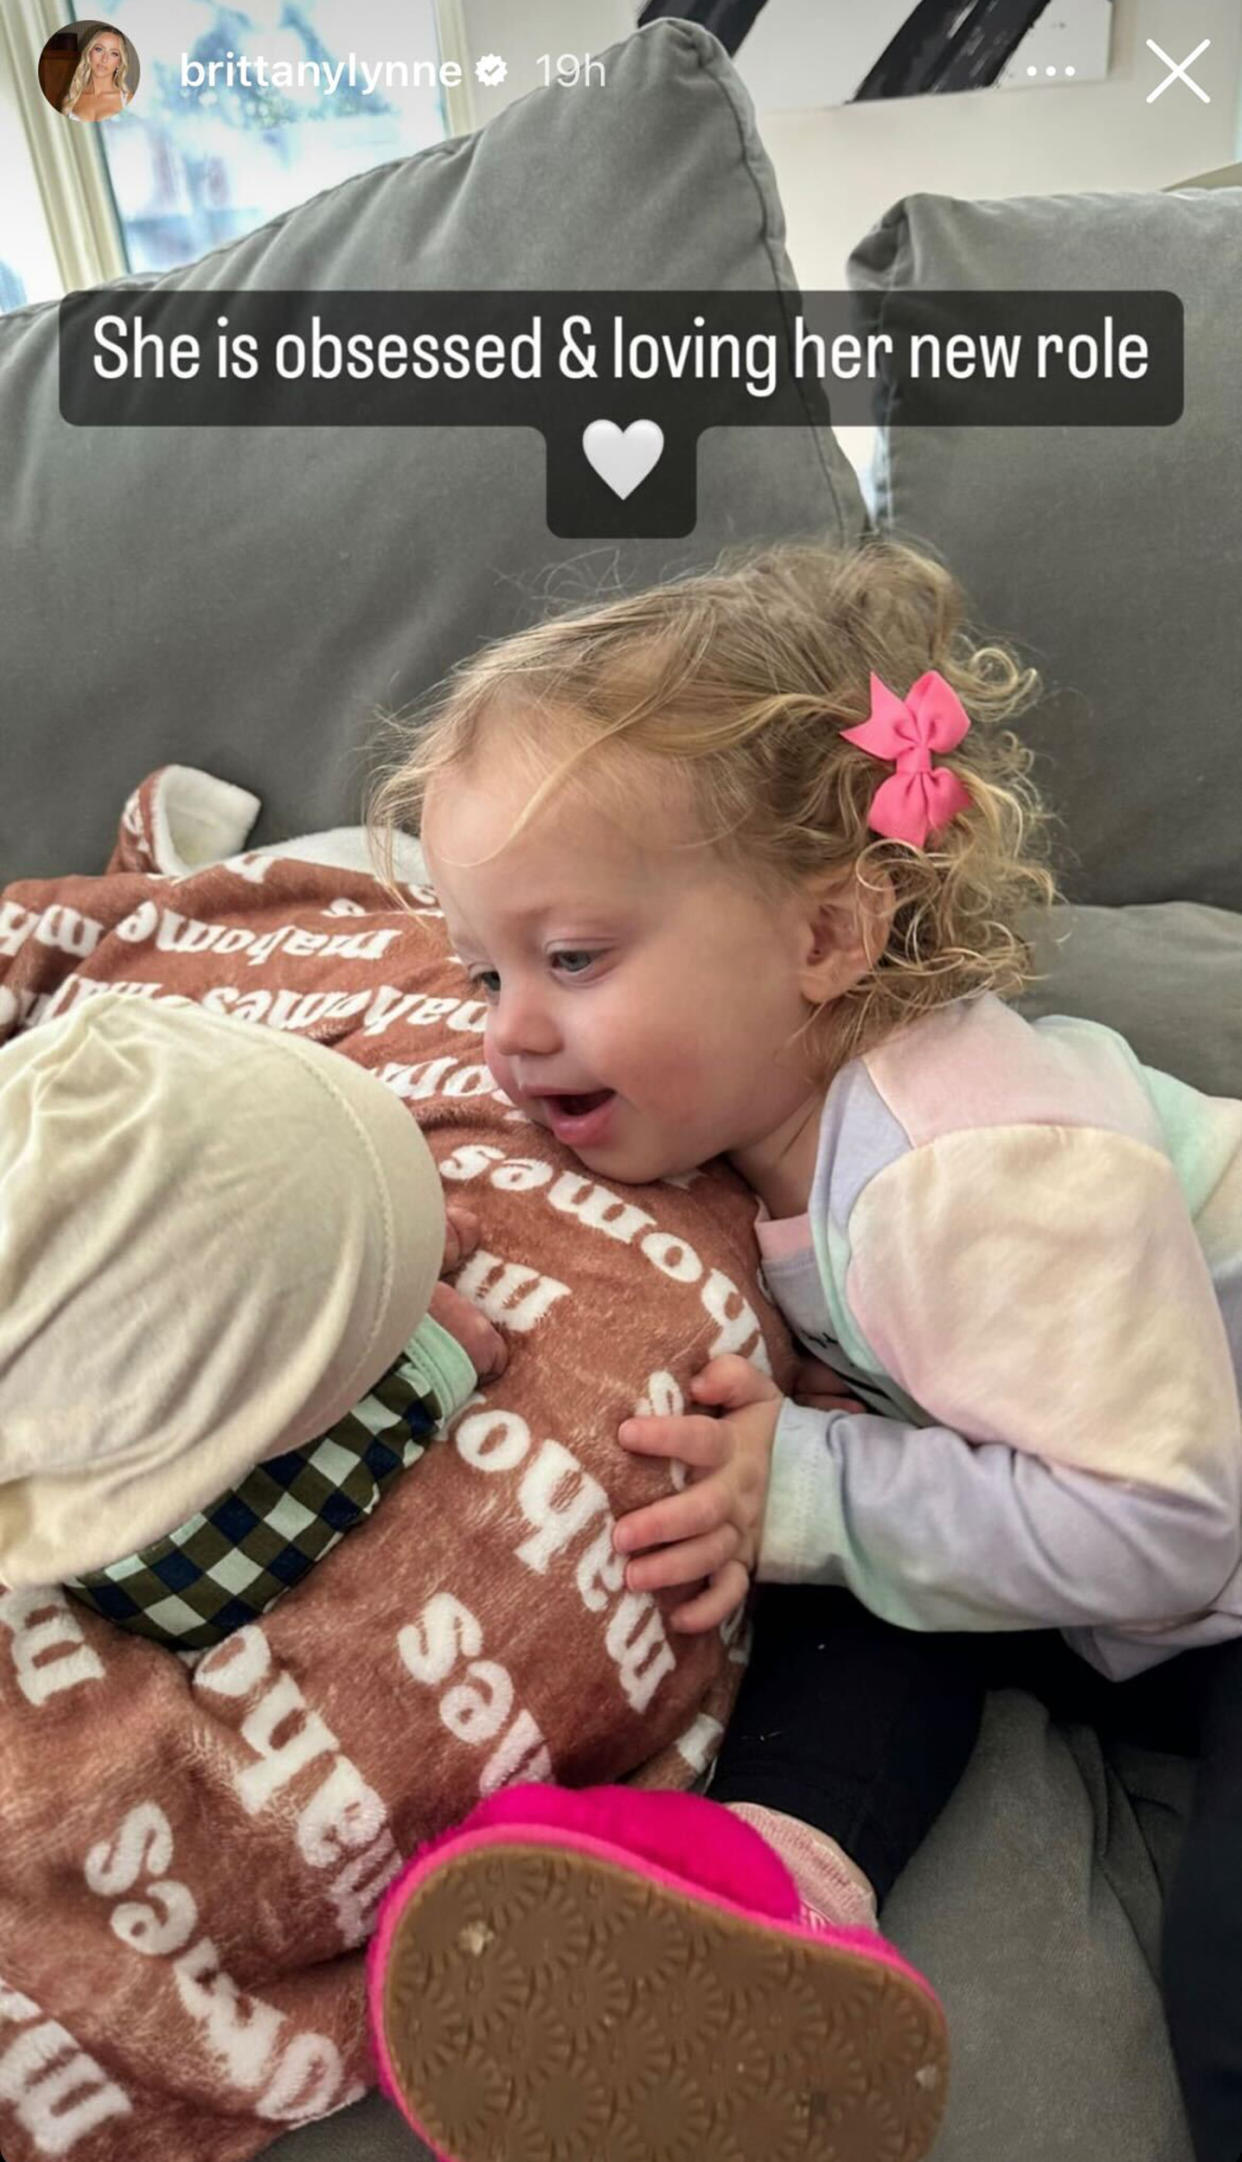 Patrick and Brittany Mahomes' daughter Sterling with her new sibling, Bronze. (Brittany Mahomes / Instagram)